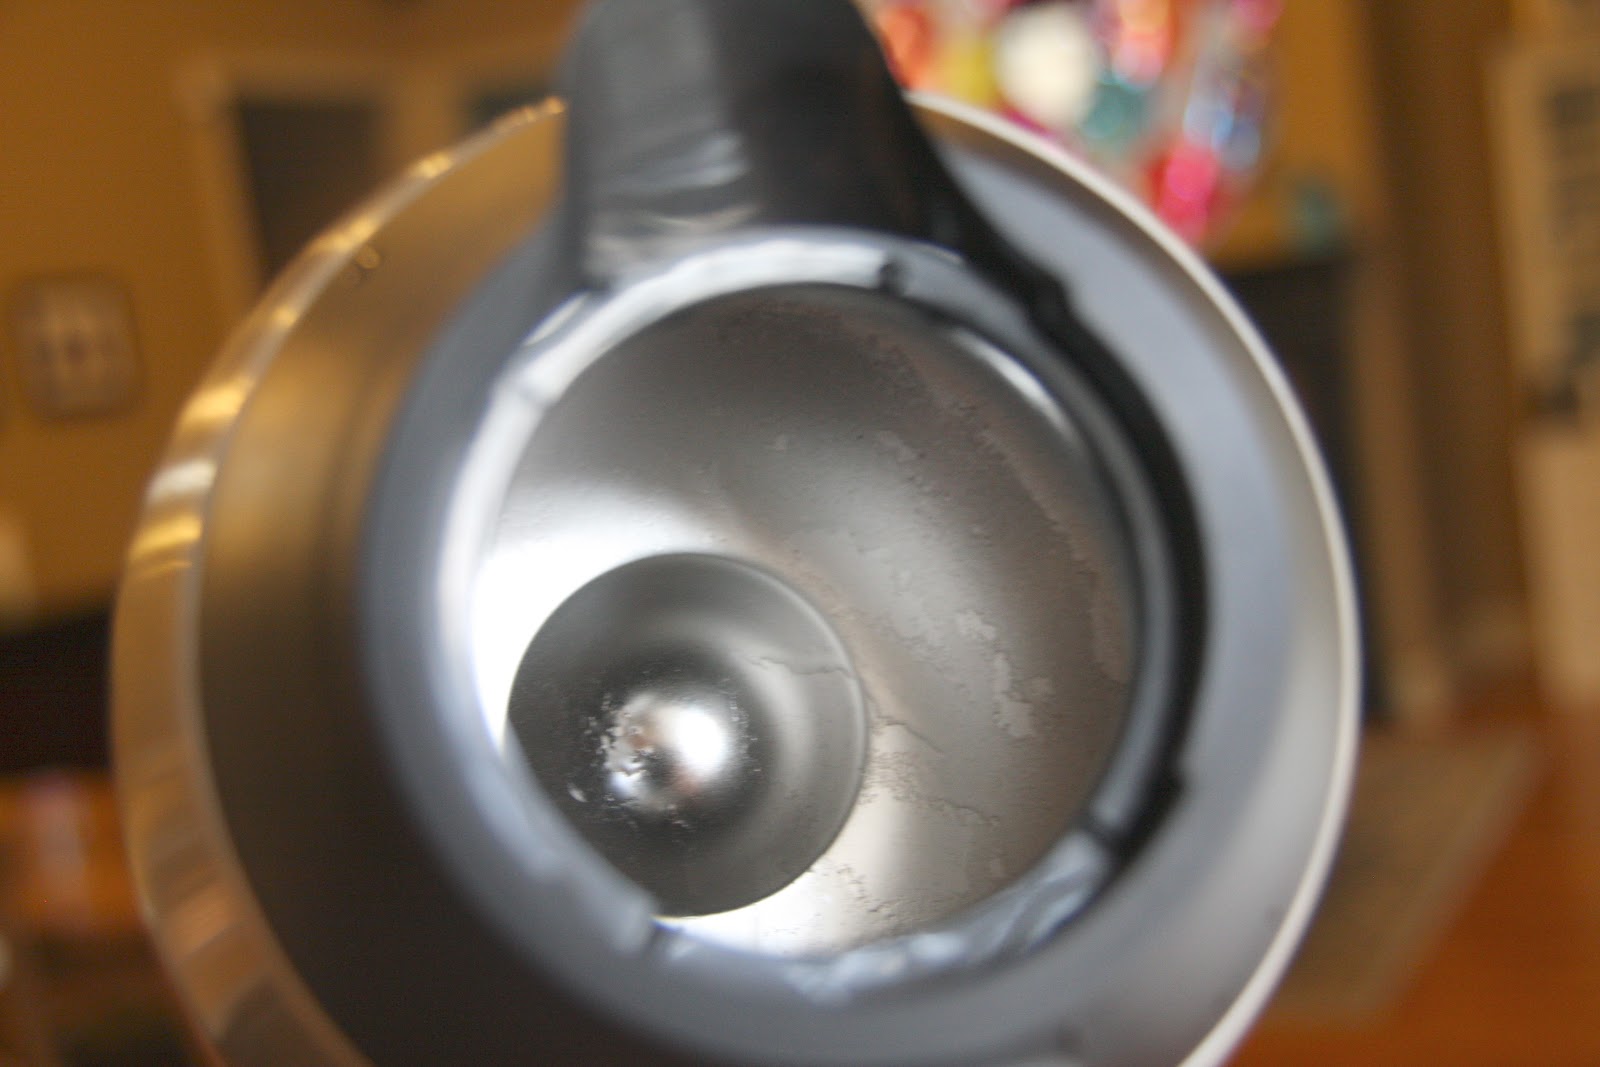 How to clean the inside of the contigo lids? There is build up of  tea/coffee on the inside. Soaking with soap and/or vinegar leaves a funny  taste : r/howto